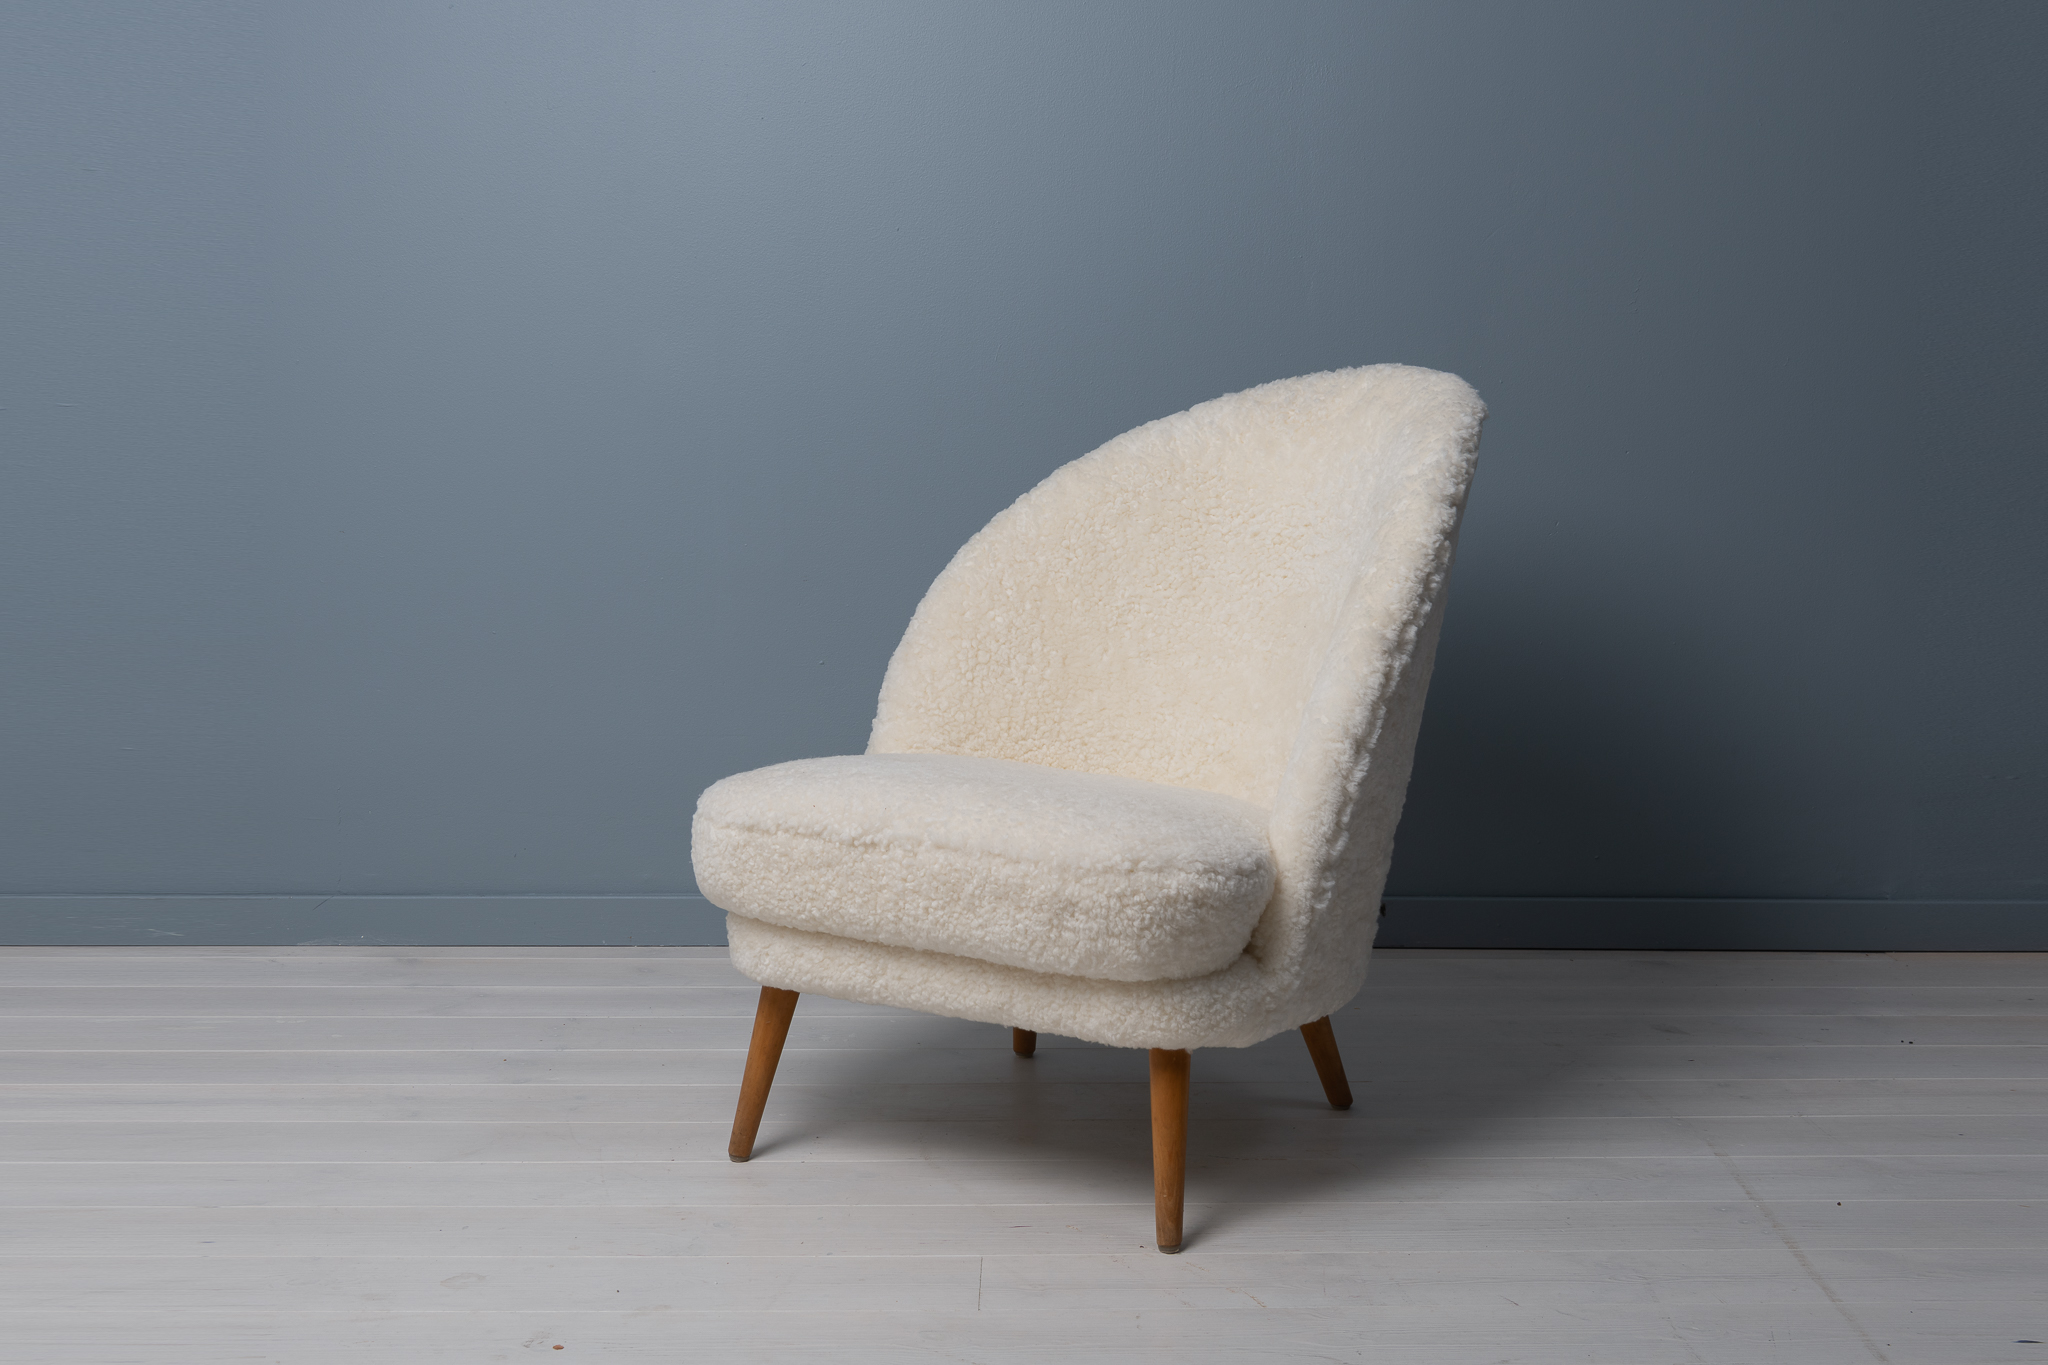 Scandinavian modern sheepskin chairs from the mid 20th century attributed to Arne Norell, Sweden. The chairs have an asymmetrical back